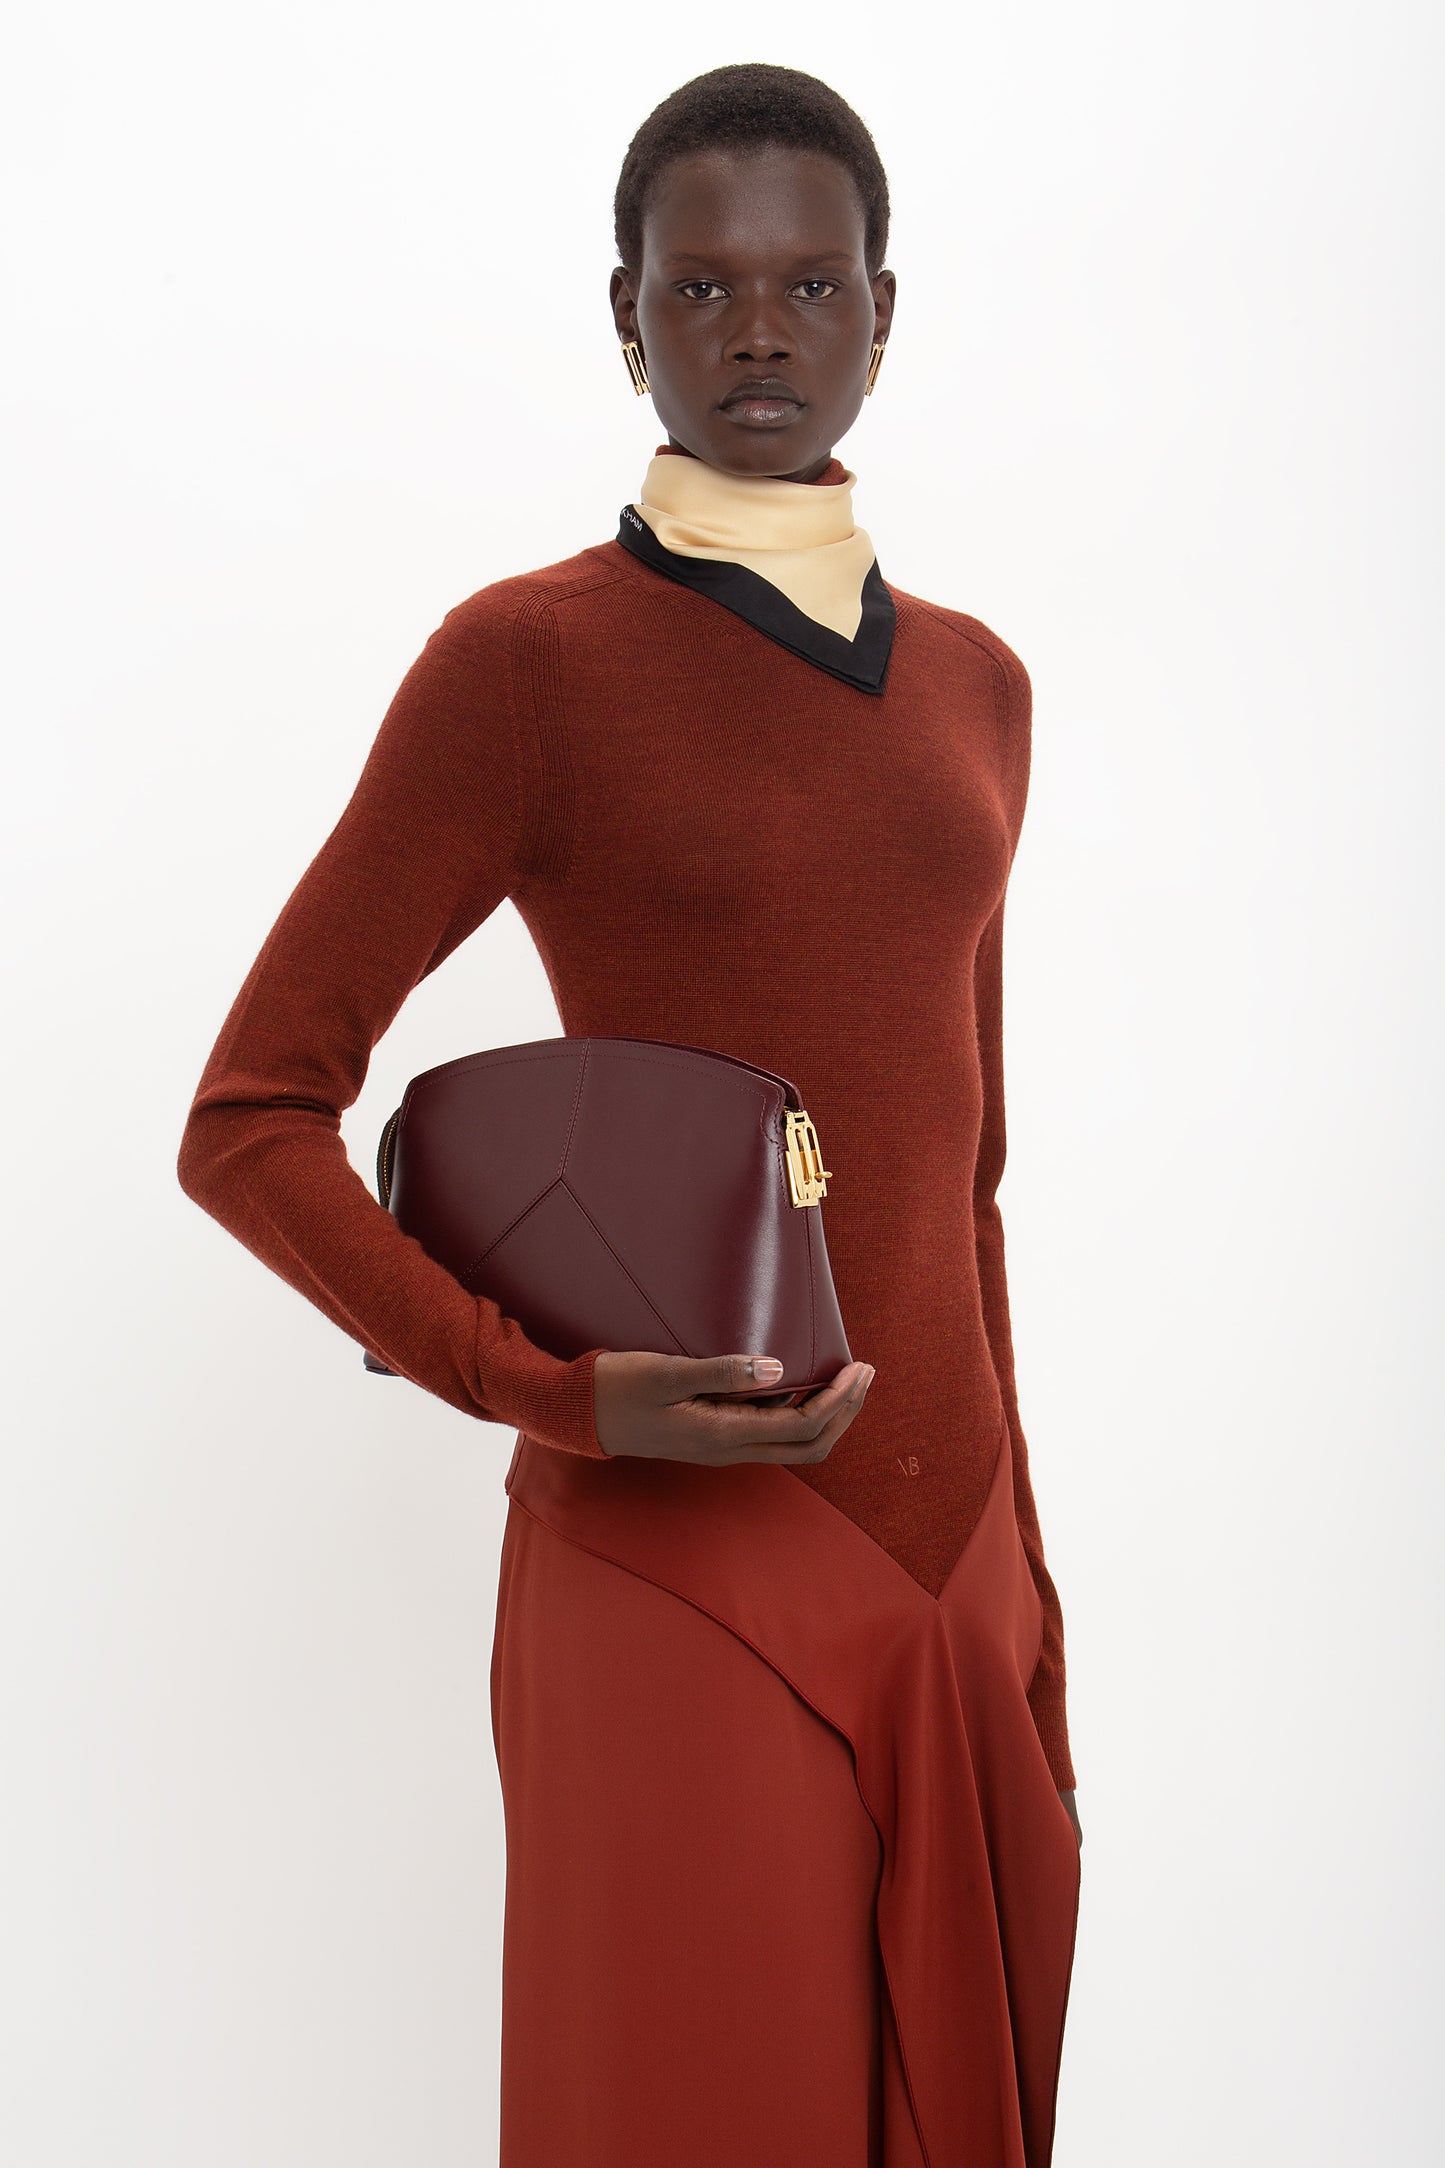 A person poses in a High Neck Tie Detail Dress In Russet, reminiscent of a Victoria Beckham collection, holding a maroon handbag against a plain white background.